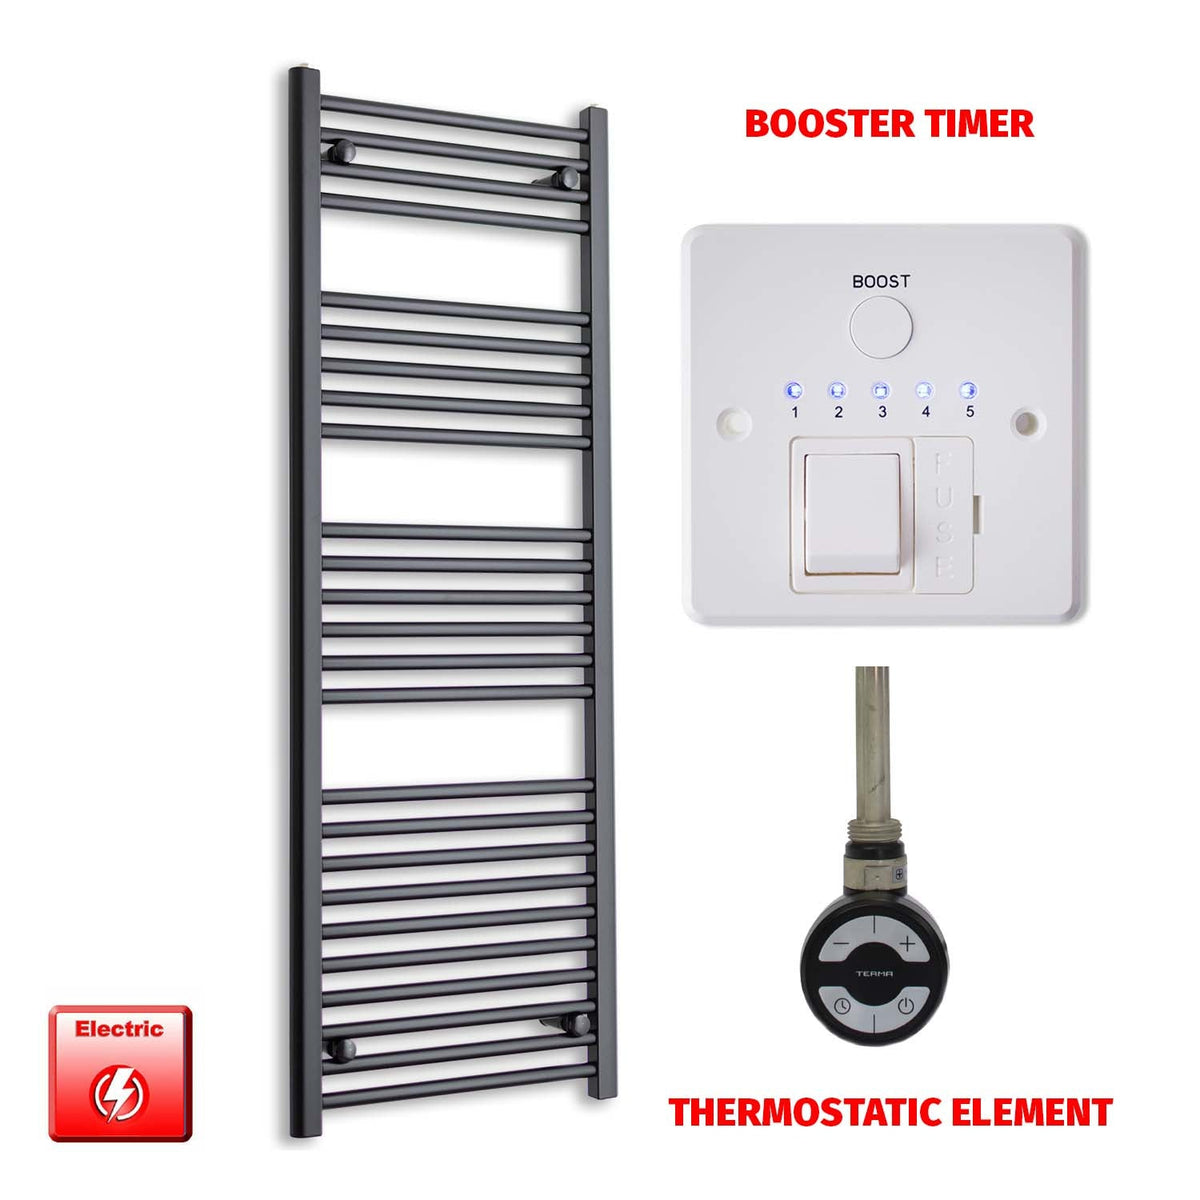 1400 x 550mm Wide Flat Black Pre-Filled Electric Heated Towel Radiator HTR MOA Thermostatic Booster Timer